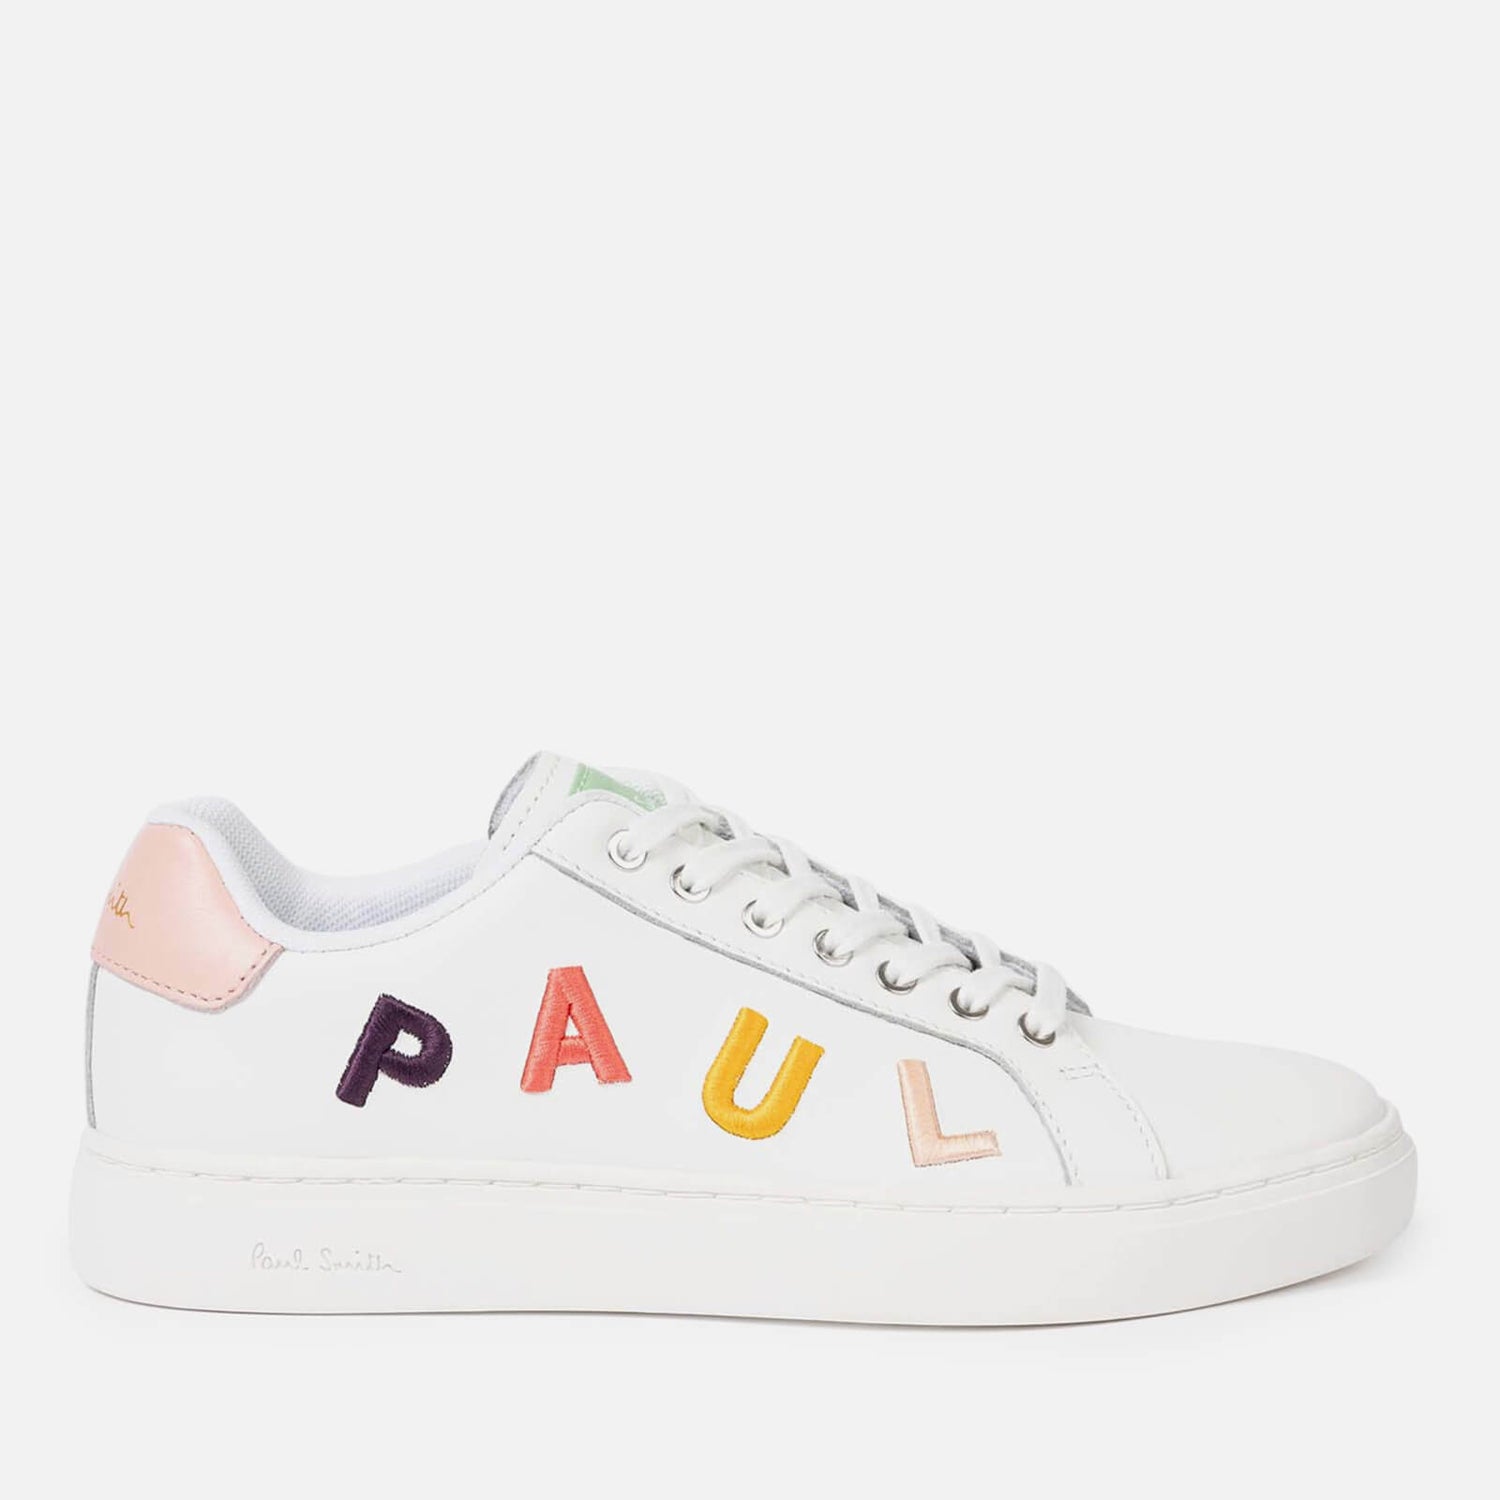 Paul Smith Women's Lapin Letters Leather Trainers - UK 8